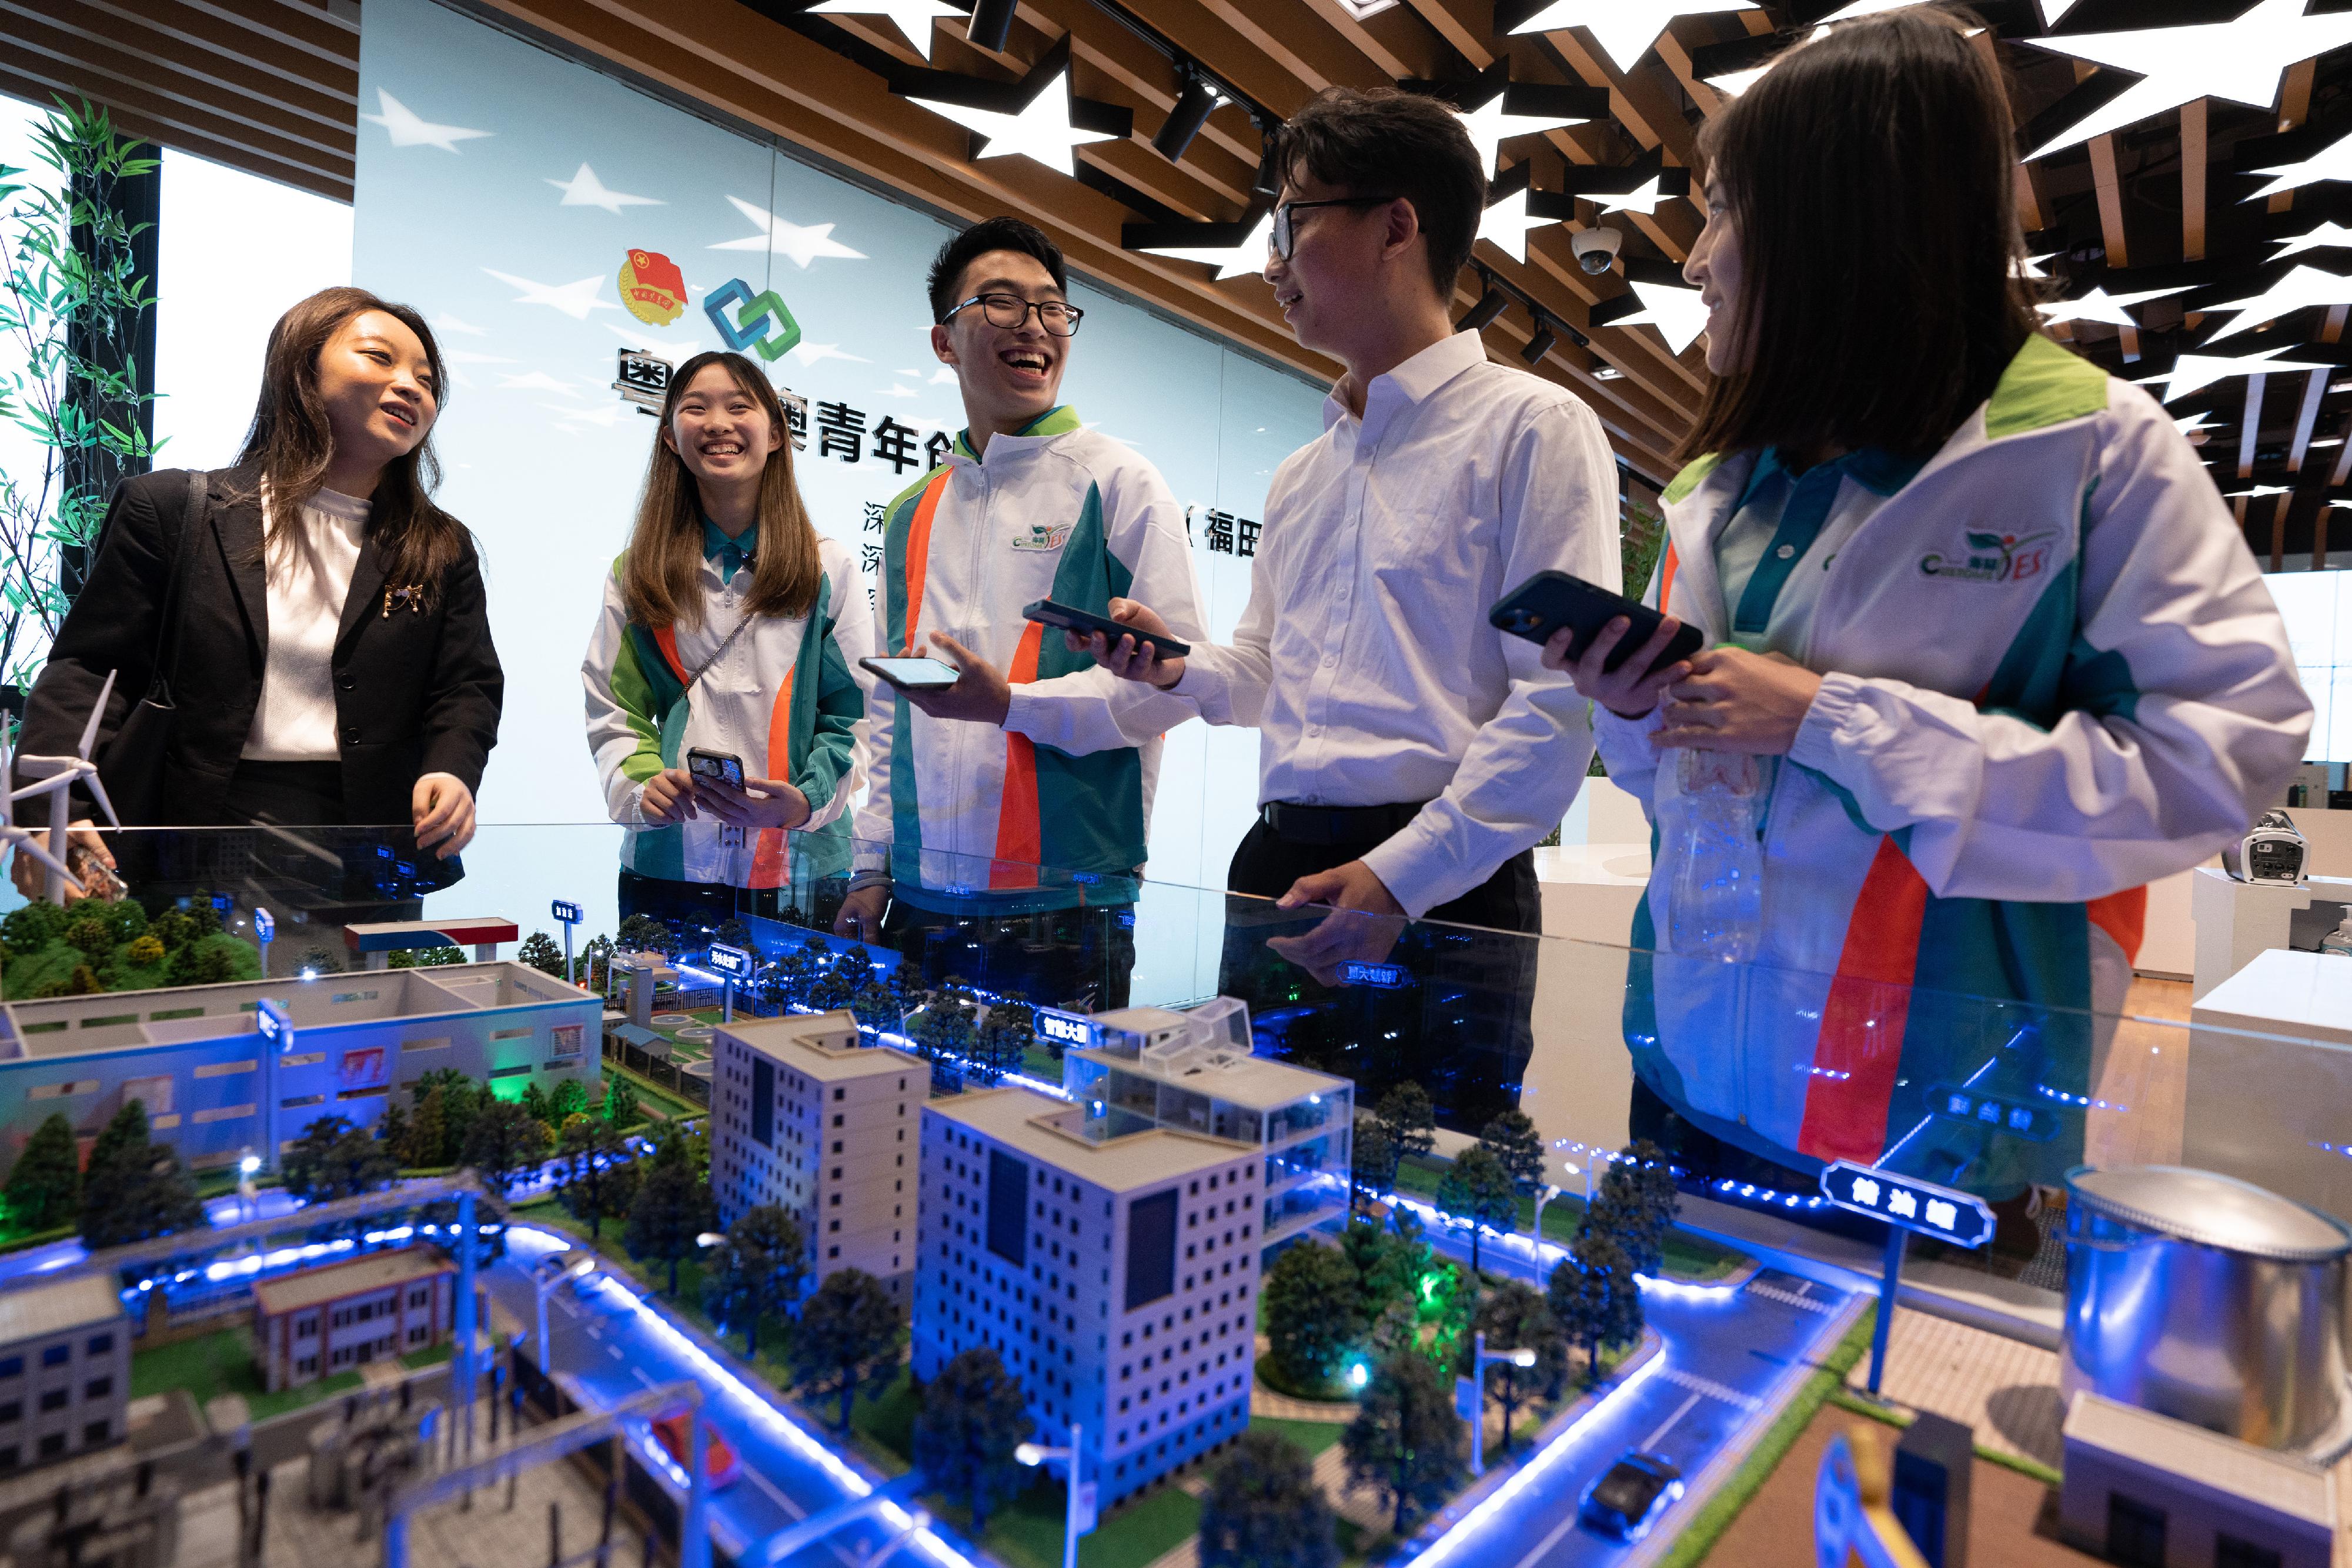 Several youth members of "Customs YES" exchanged views with some members of the Shenzhen Youth Federation during their visit to the Shenzhen-Hong Kong Innovation and Technology Co-operation Zone on March 18.